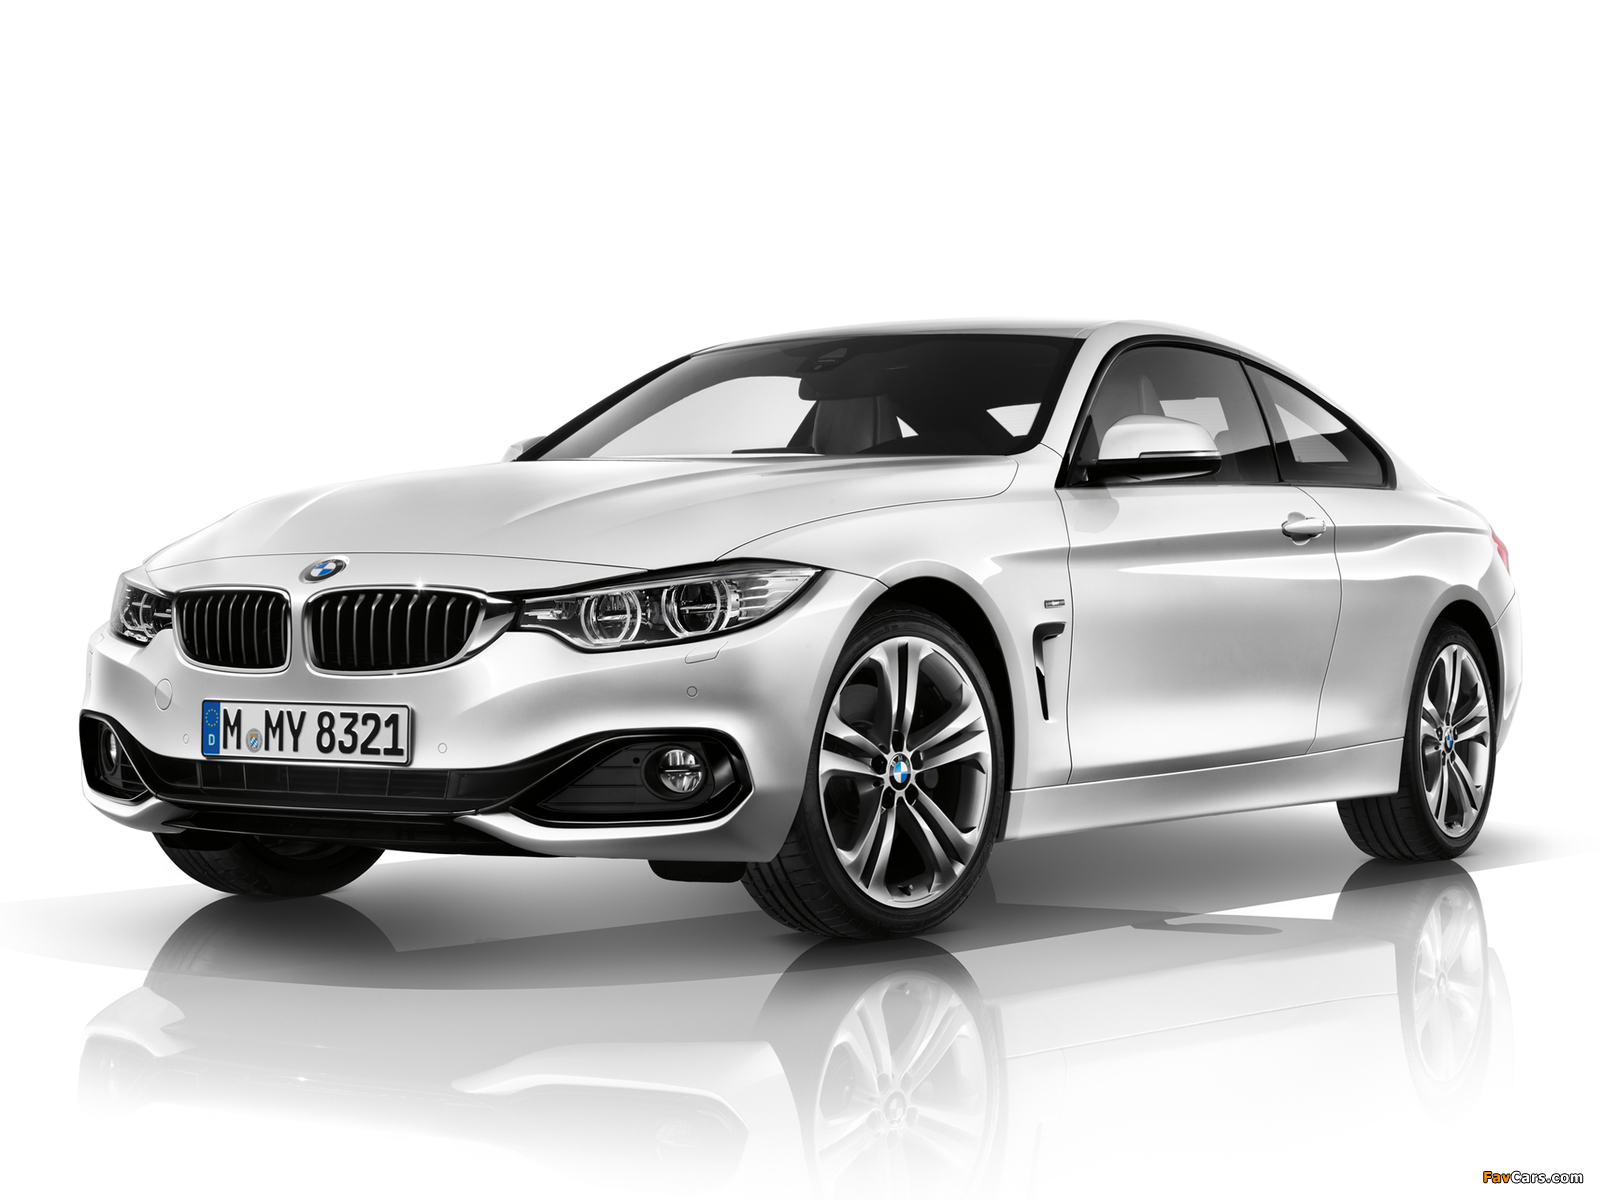 BMW 435i xDrive Coupé Sport Line (F32) 2013 pictures (1600 x 1200)